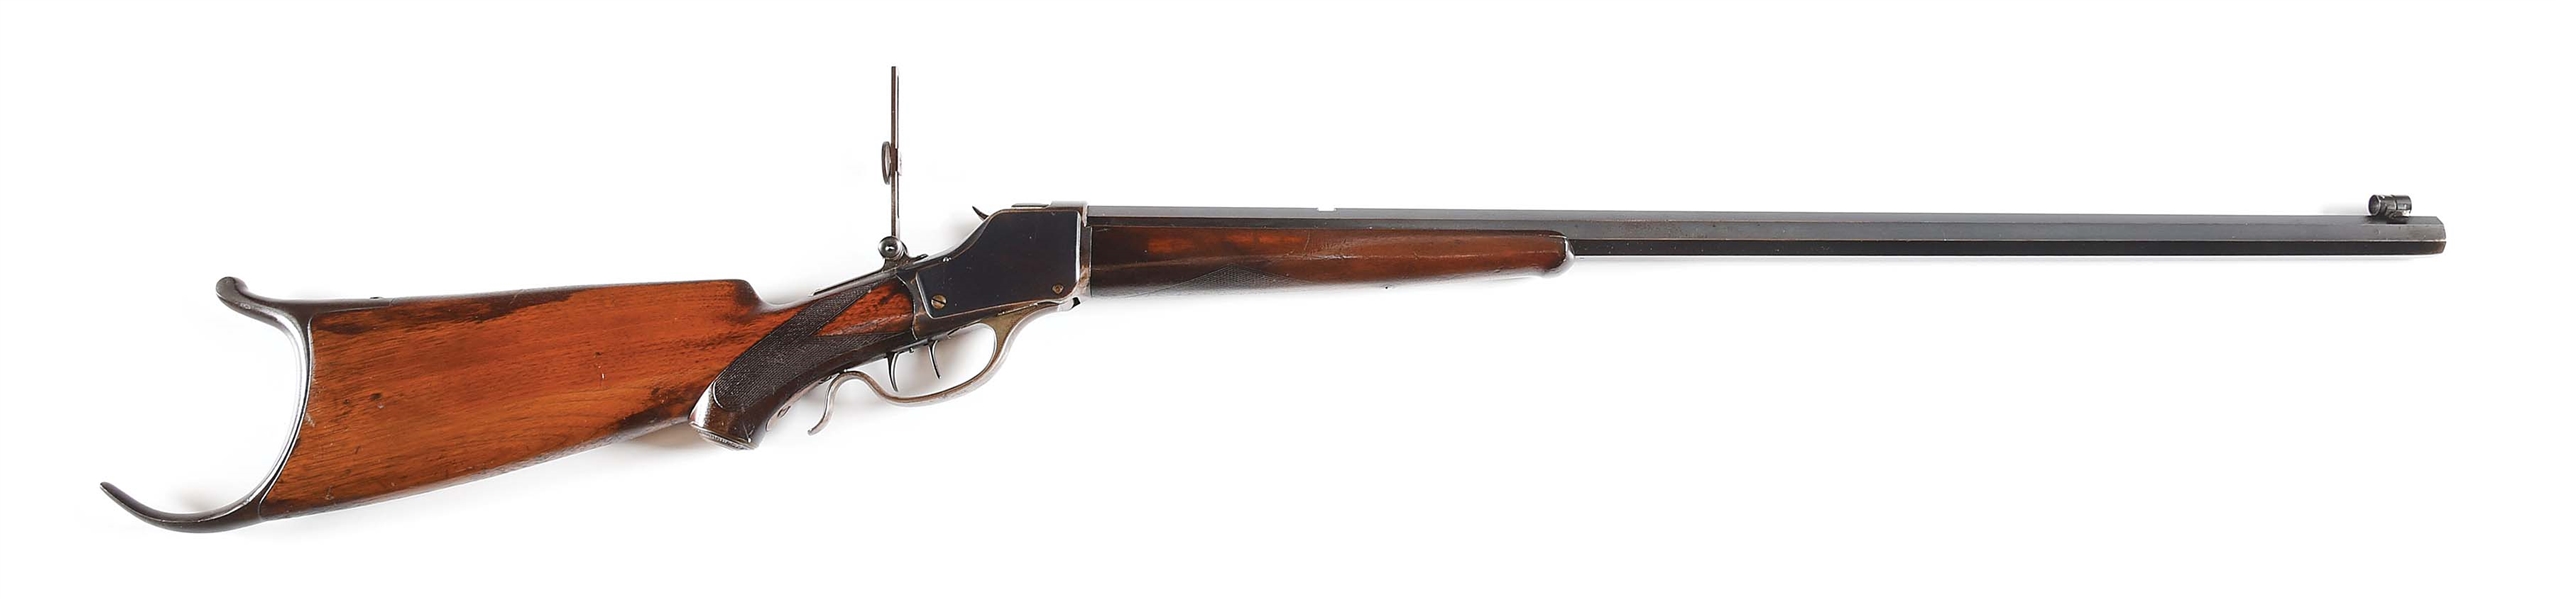 (C) SPECIAL ORDER WINCHESTER 1885 HIGH WALL SINGLE SHOT RIFLE.